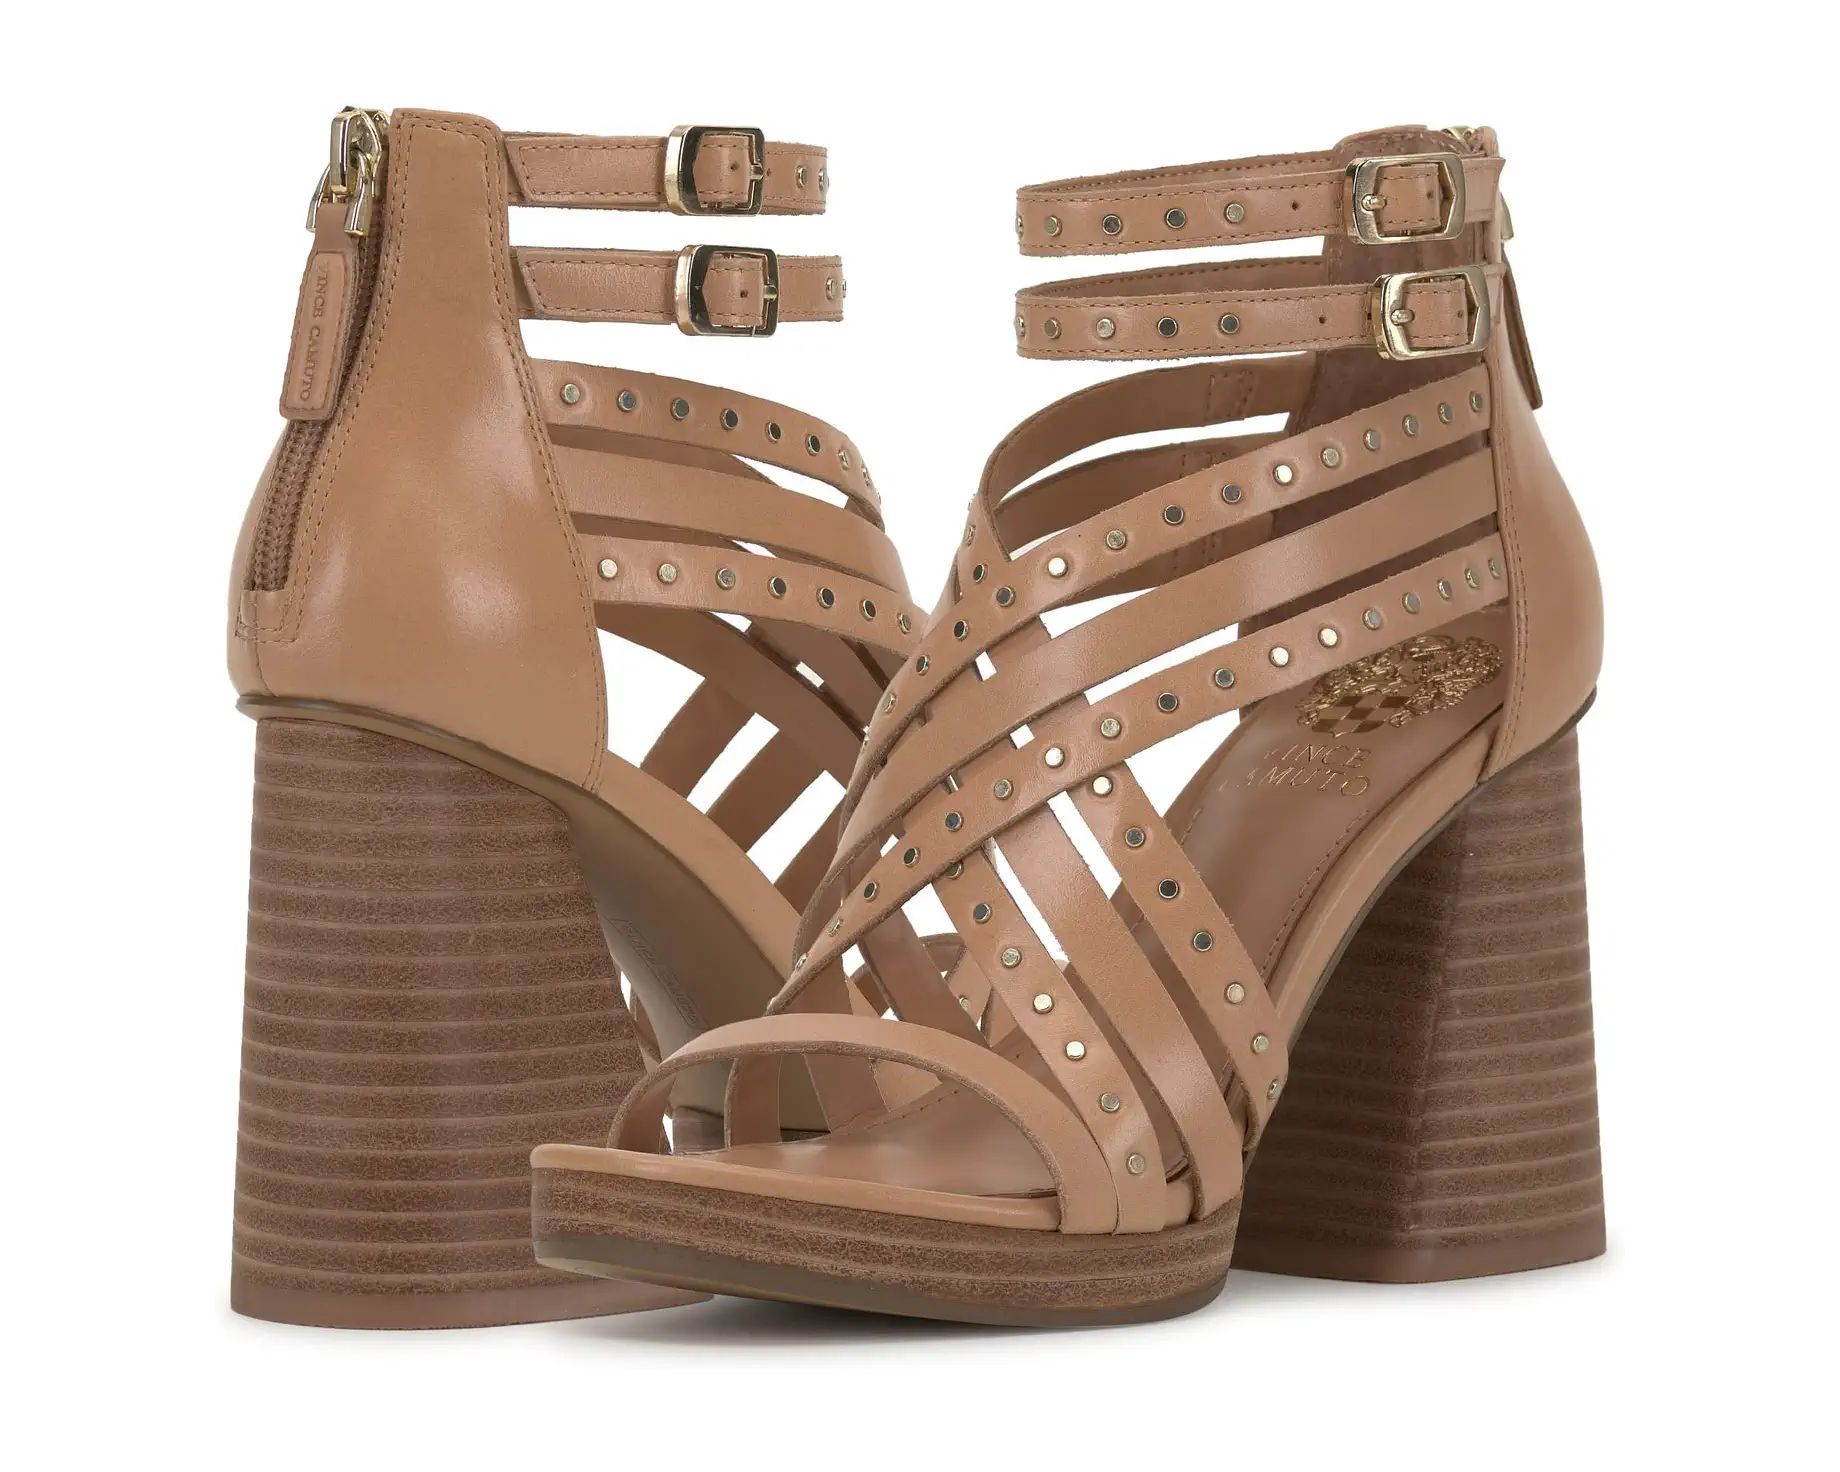 Vince Camuto Nanthie | Zappos